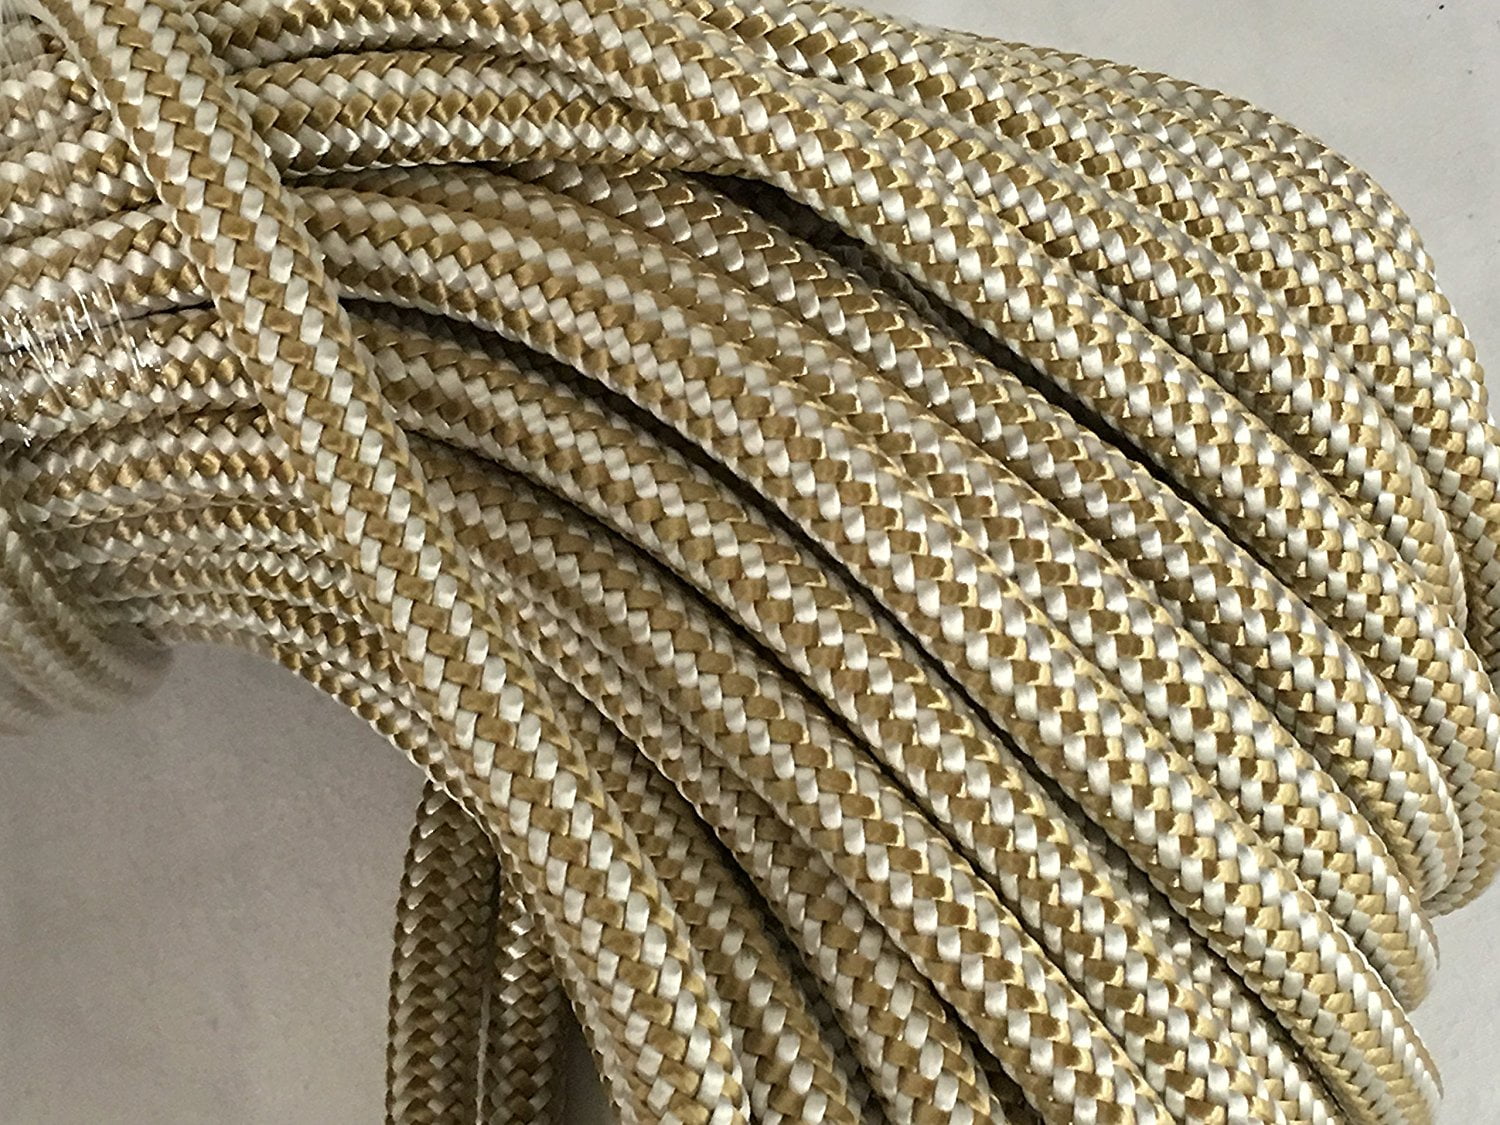 High quality multiple purpose rope 150 feet of 3/8 inch nylon rope 